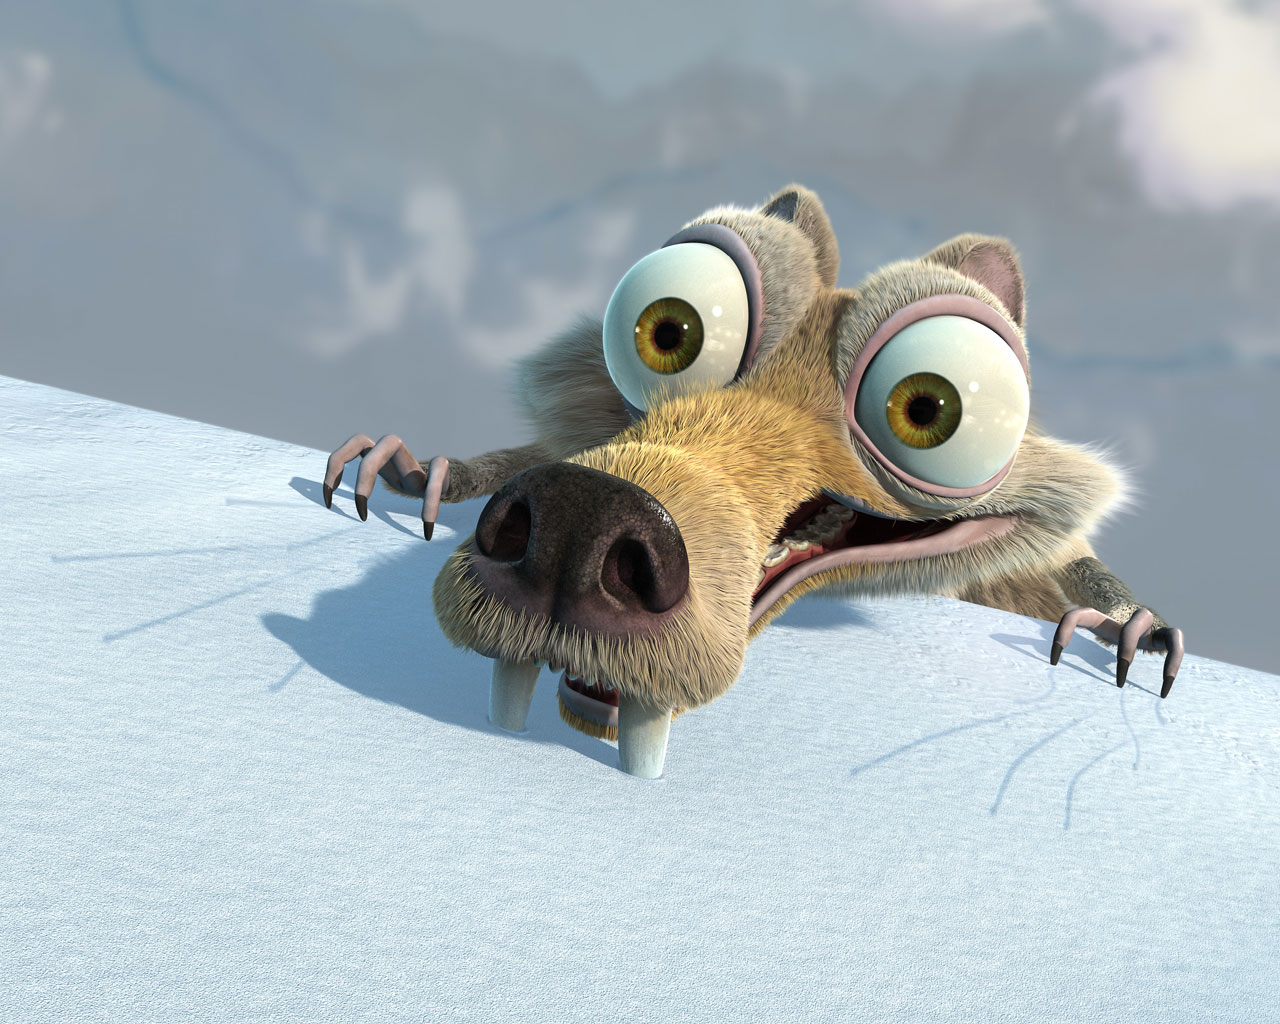 General 1280x1024 Ice Age squirrel Ice Age: The Meltdown Scrat movies animated movies